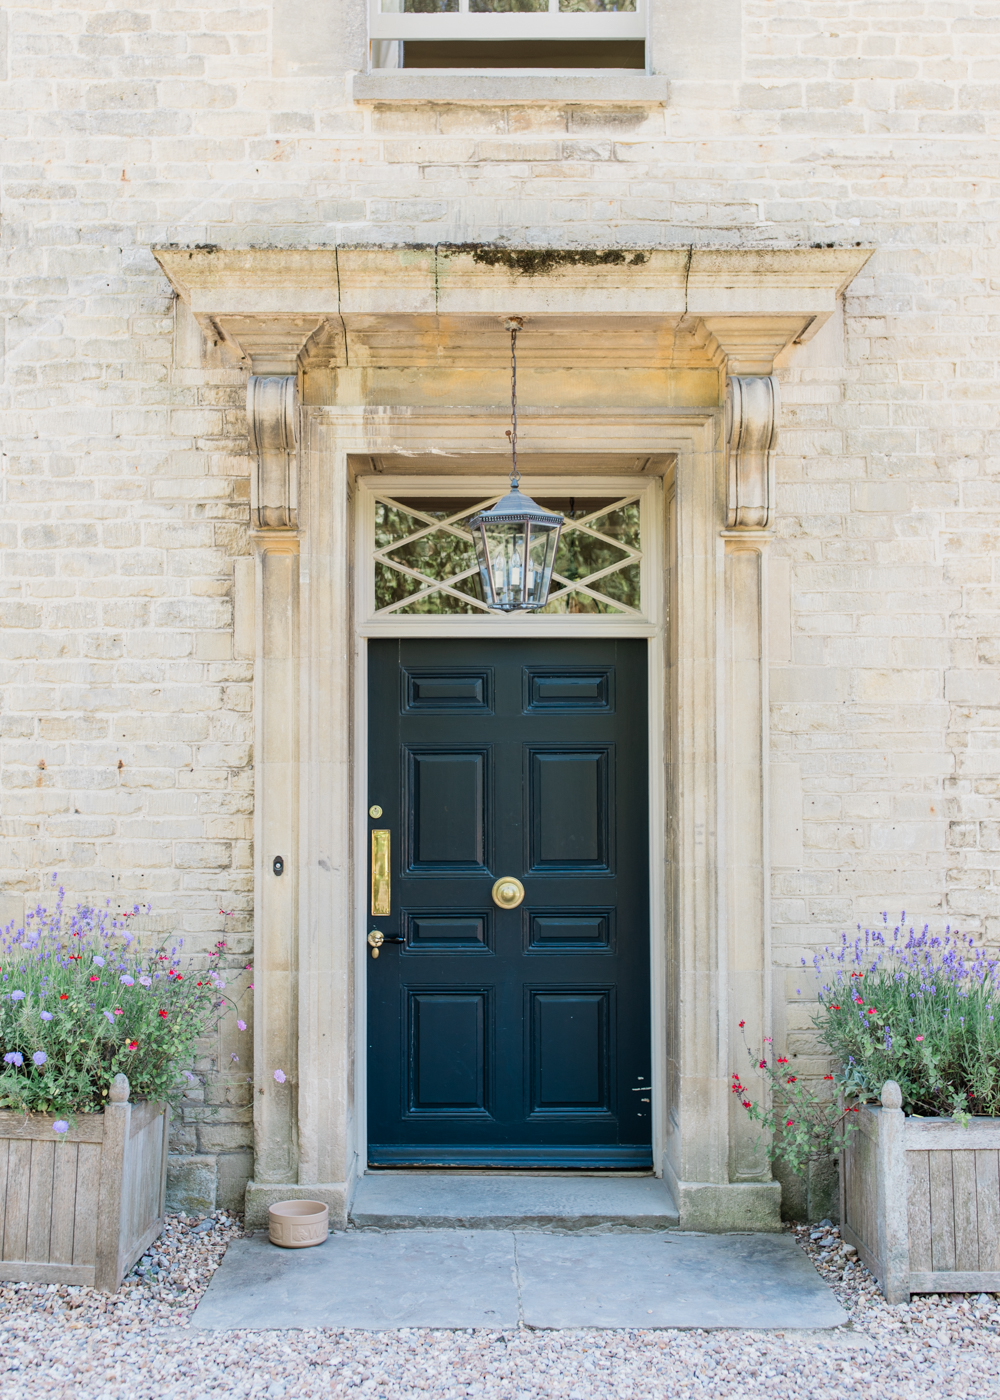 Cotswolds Wedding Photographer | England Wedding Photography | Cotswolds Travel Guide | Molly Carr Photography | The Rectory Hotel | Crudwell, Malmesbury, England